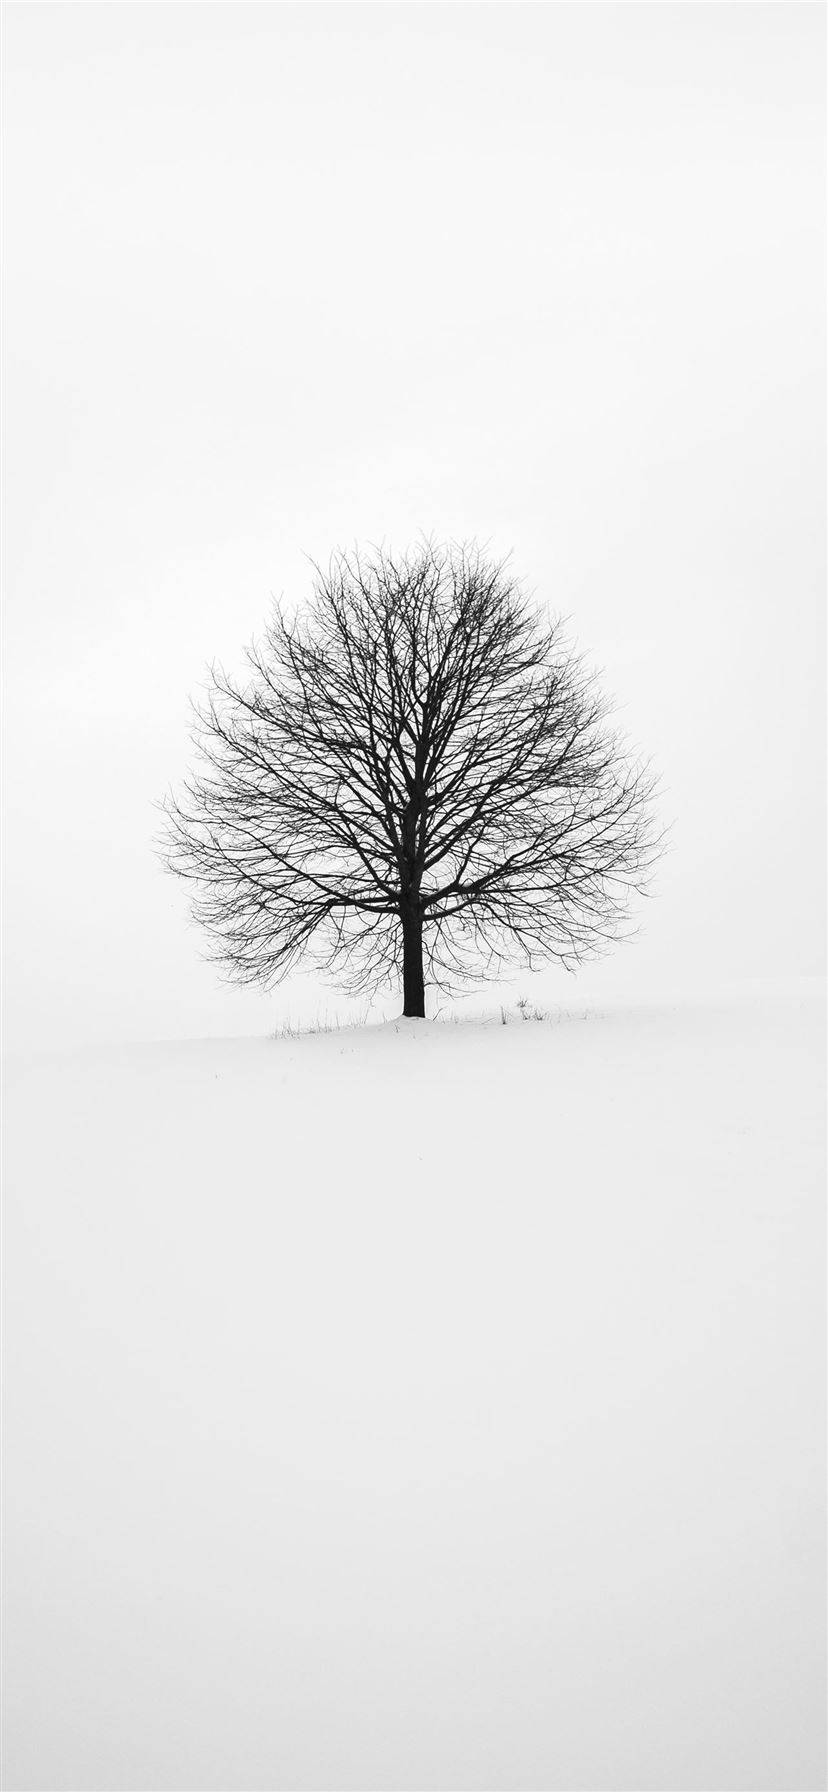 White With Leafless Tree Iphone